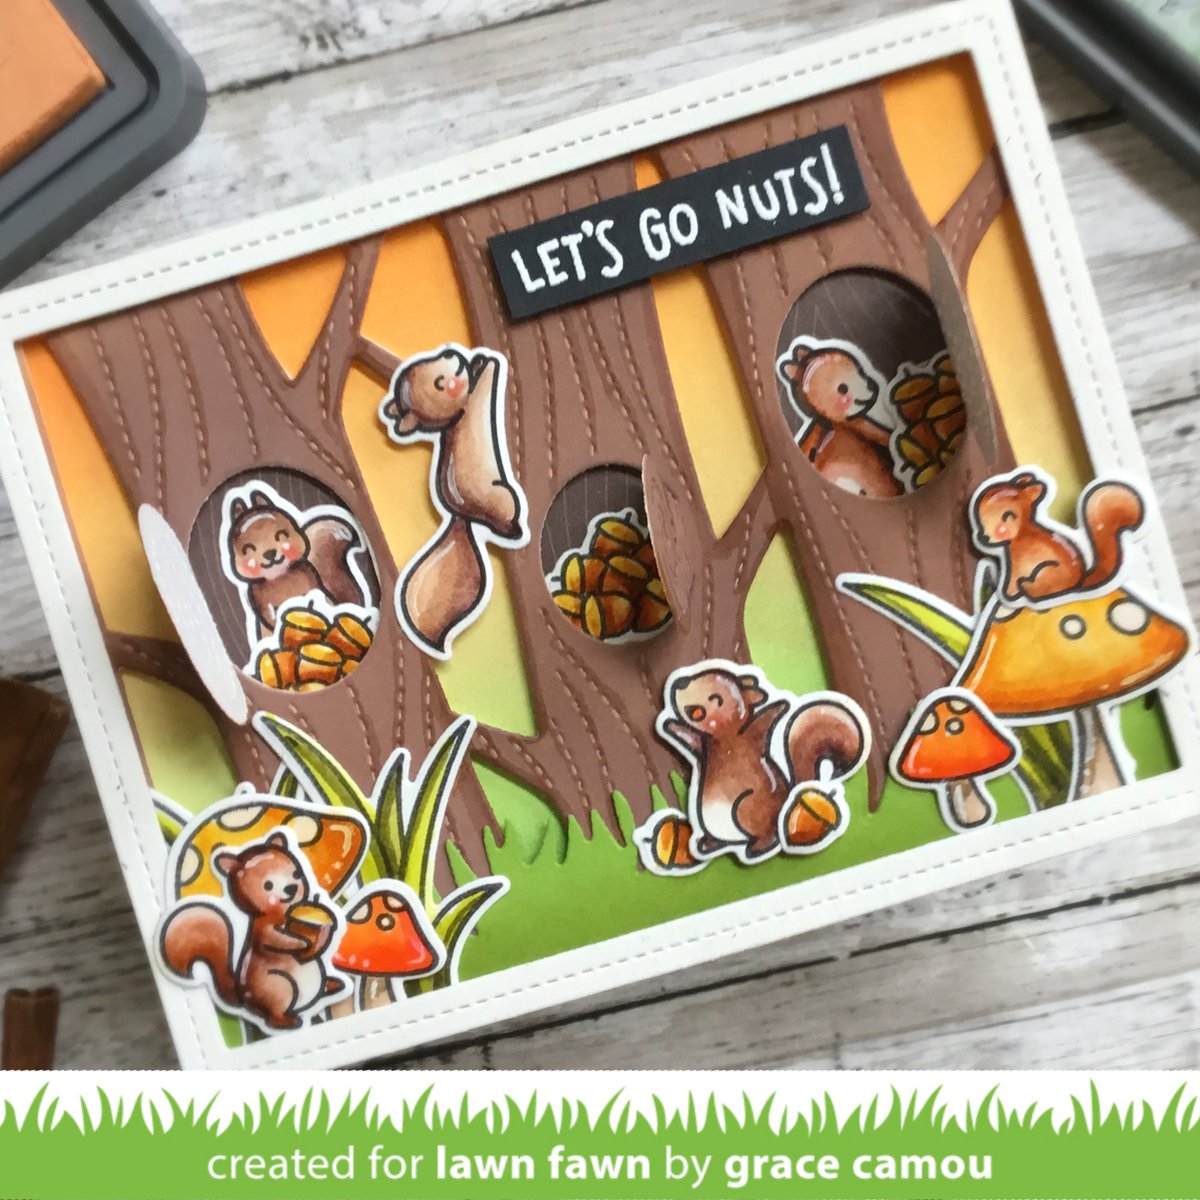 Lawn Fawn on Twitter: "Grace created a super fun card that combines Let's  Go Nuts with Lift the Flap Tree Backdrop! We hope you will join us for the  next week as